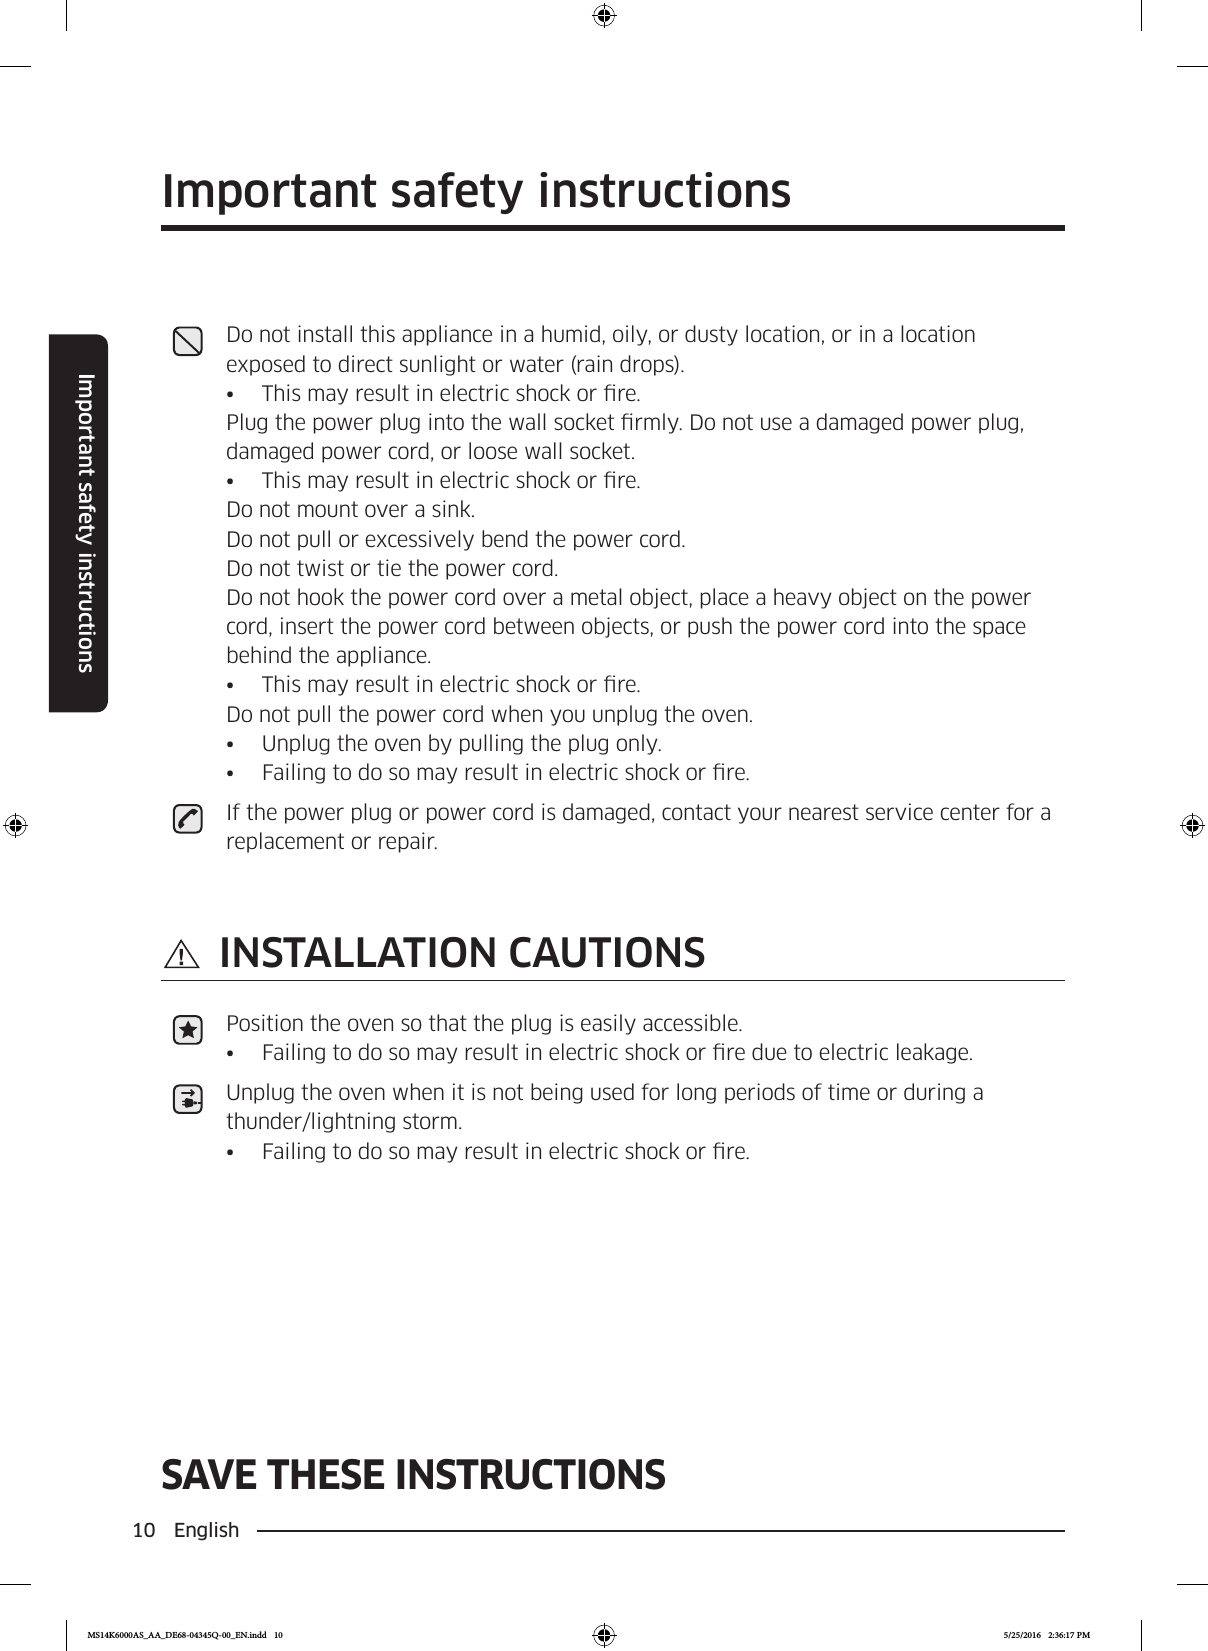 10 EnglishImportant safety instructionsSAVE THESE INSTRUCTIONSImportant safety instructionsSAVE THESE INSTRUCTIONSDo not install this appliance in a humid, oily, or dusty location, or in a location exposed to direct sunlight or water (rain drops).•  This may result in electric shock or re.Plug the power plug into the wall socket rmly. Do not use a damaged power plug, damaged power cord, or loose wall socket.•  This may result in electric shock or re.Do not mount over a sink.  Do not pull or excessively bend the power cord.  Do not twist or tie the power cord.Do not hook the power cord over a metal object, place a heavy object on the power cord, insert the power cord between objects, or push the power cord into the space behind the appliance.•  This may result in electric shock or re. Do not pull the power cord when you unplug the oven.•  Unplug the oven by pulling the plug only.•  Failing to do so may result in electric shock or re.If the power plug or power cord is damaged, contact your nearest service center for a replacement or repair. INSTALLATION CAUTIONSPosition the oven so that the plug is easily accessible.•  Failing to do so may result in electric shock or re due to electric leakage.Unplug the oven when it is not being used for long periods of time or during a thunder/lightning storm.•  Failing to do so may result in electric shock or re.MS14K6000AS_AA_DE68-04345Q-00_EN.indd   10 5/25/2016   2:36:17 PM